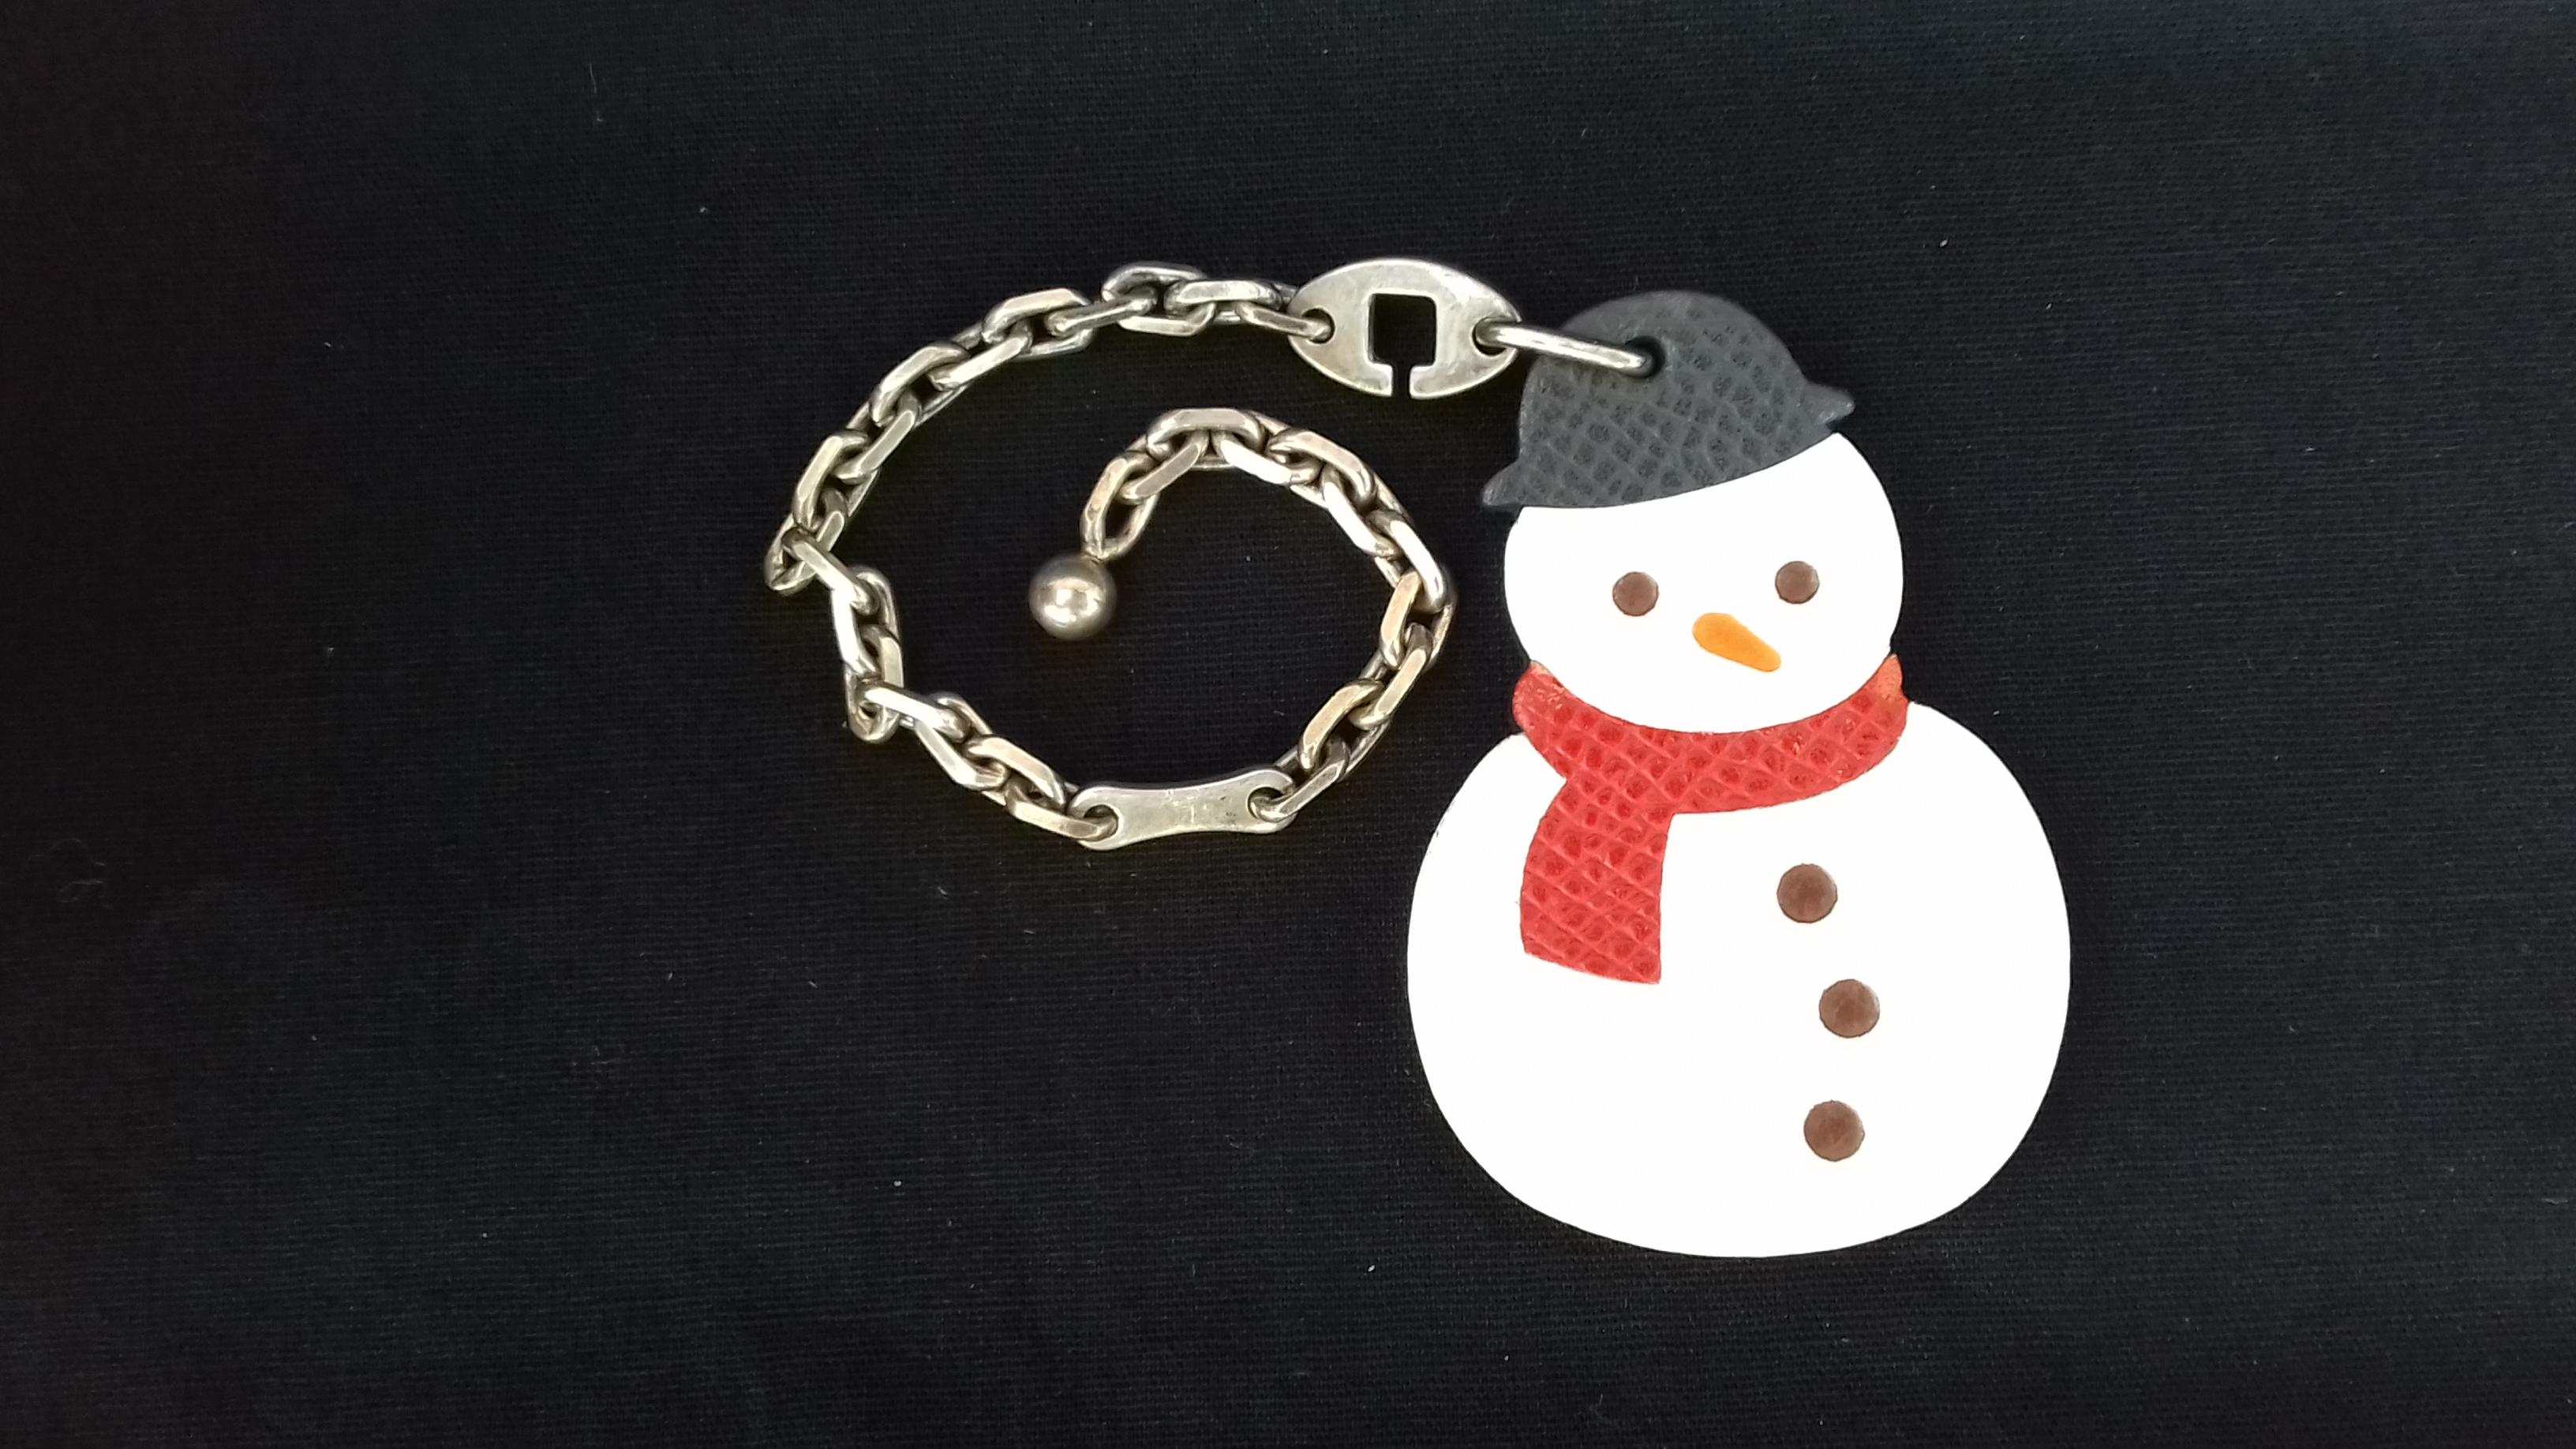 Super Cute Authentic Hermès Key Holder

Can be used as Bag Charm for your Kelly or Birkin bag

Pattern: Snowman

Perfect for winter and Christmas Season

Made of Courchevel Leather and Silver-Tone Metal Chain

Colorways: White, Red, Orange,